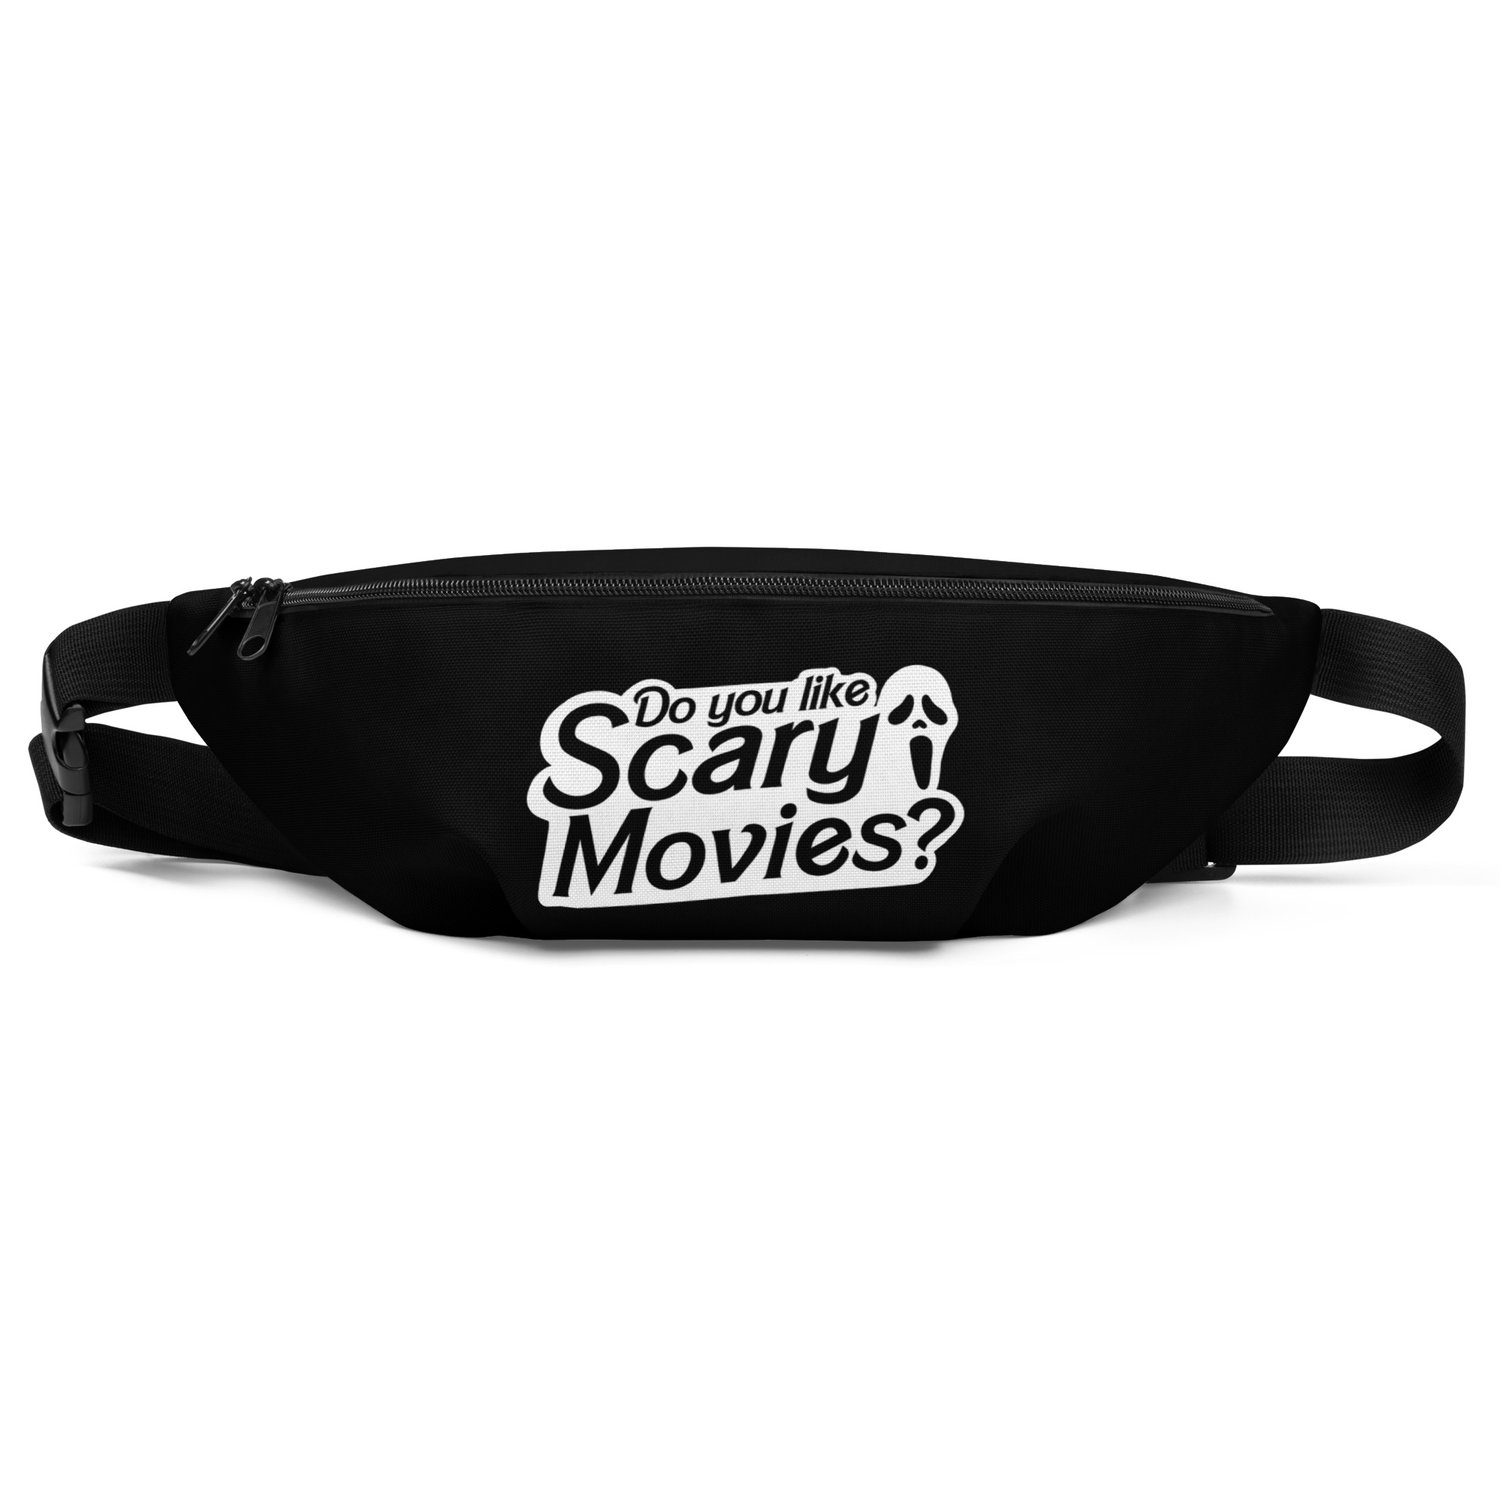 Image of Do You Like Scary Movies? fanny pack